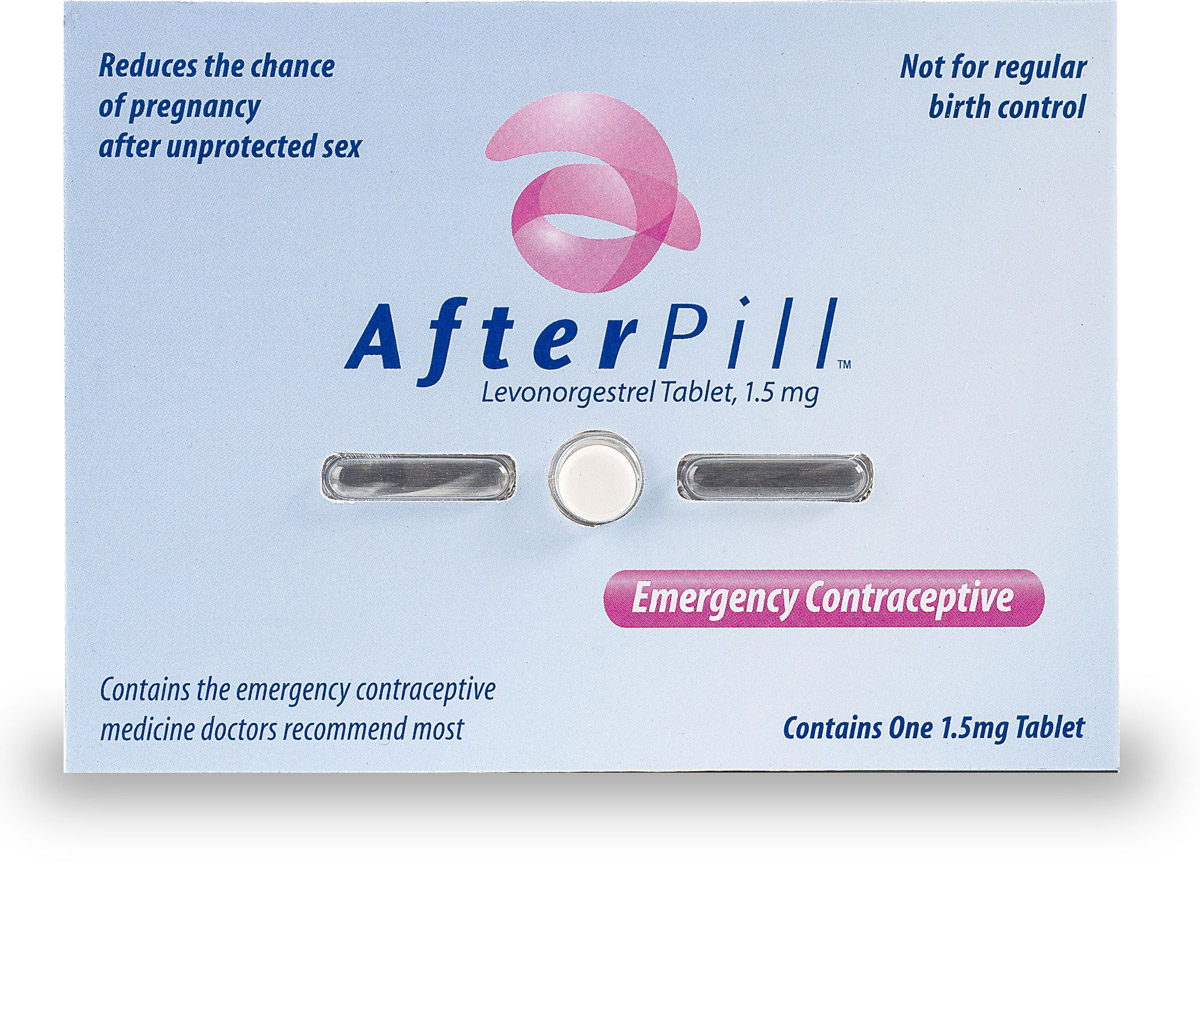 how to avoid unwanted pregnancy with the pill